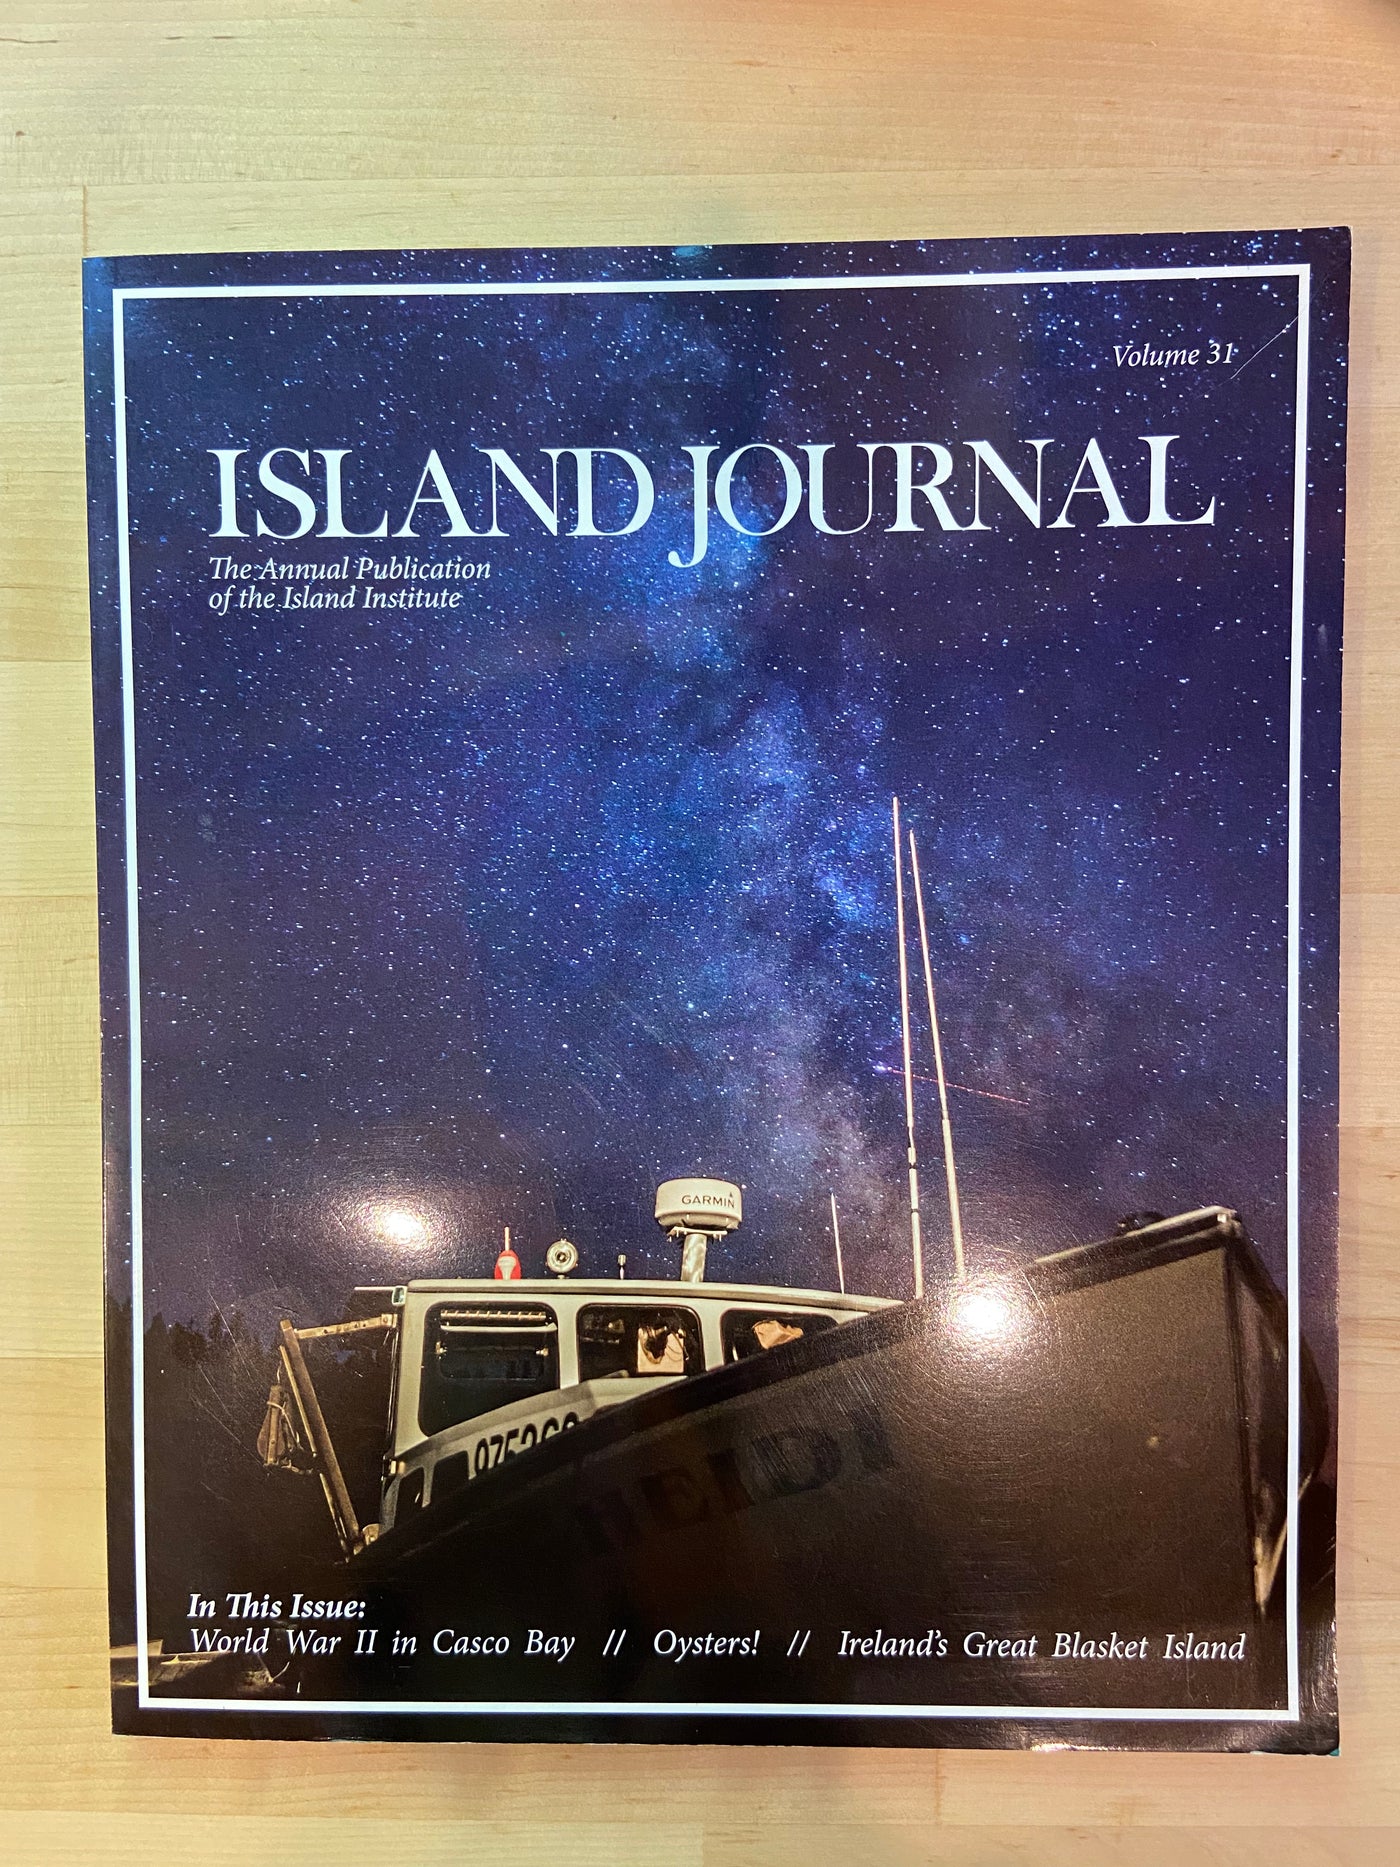 Island Journal: The Annual Publication of the Island Institute